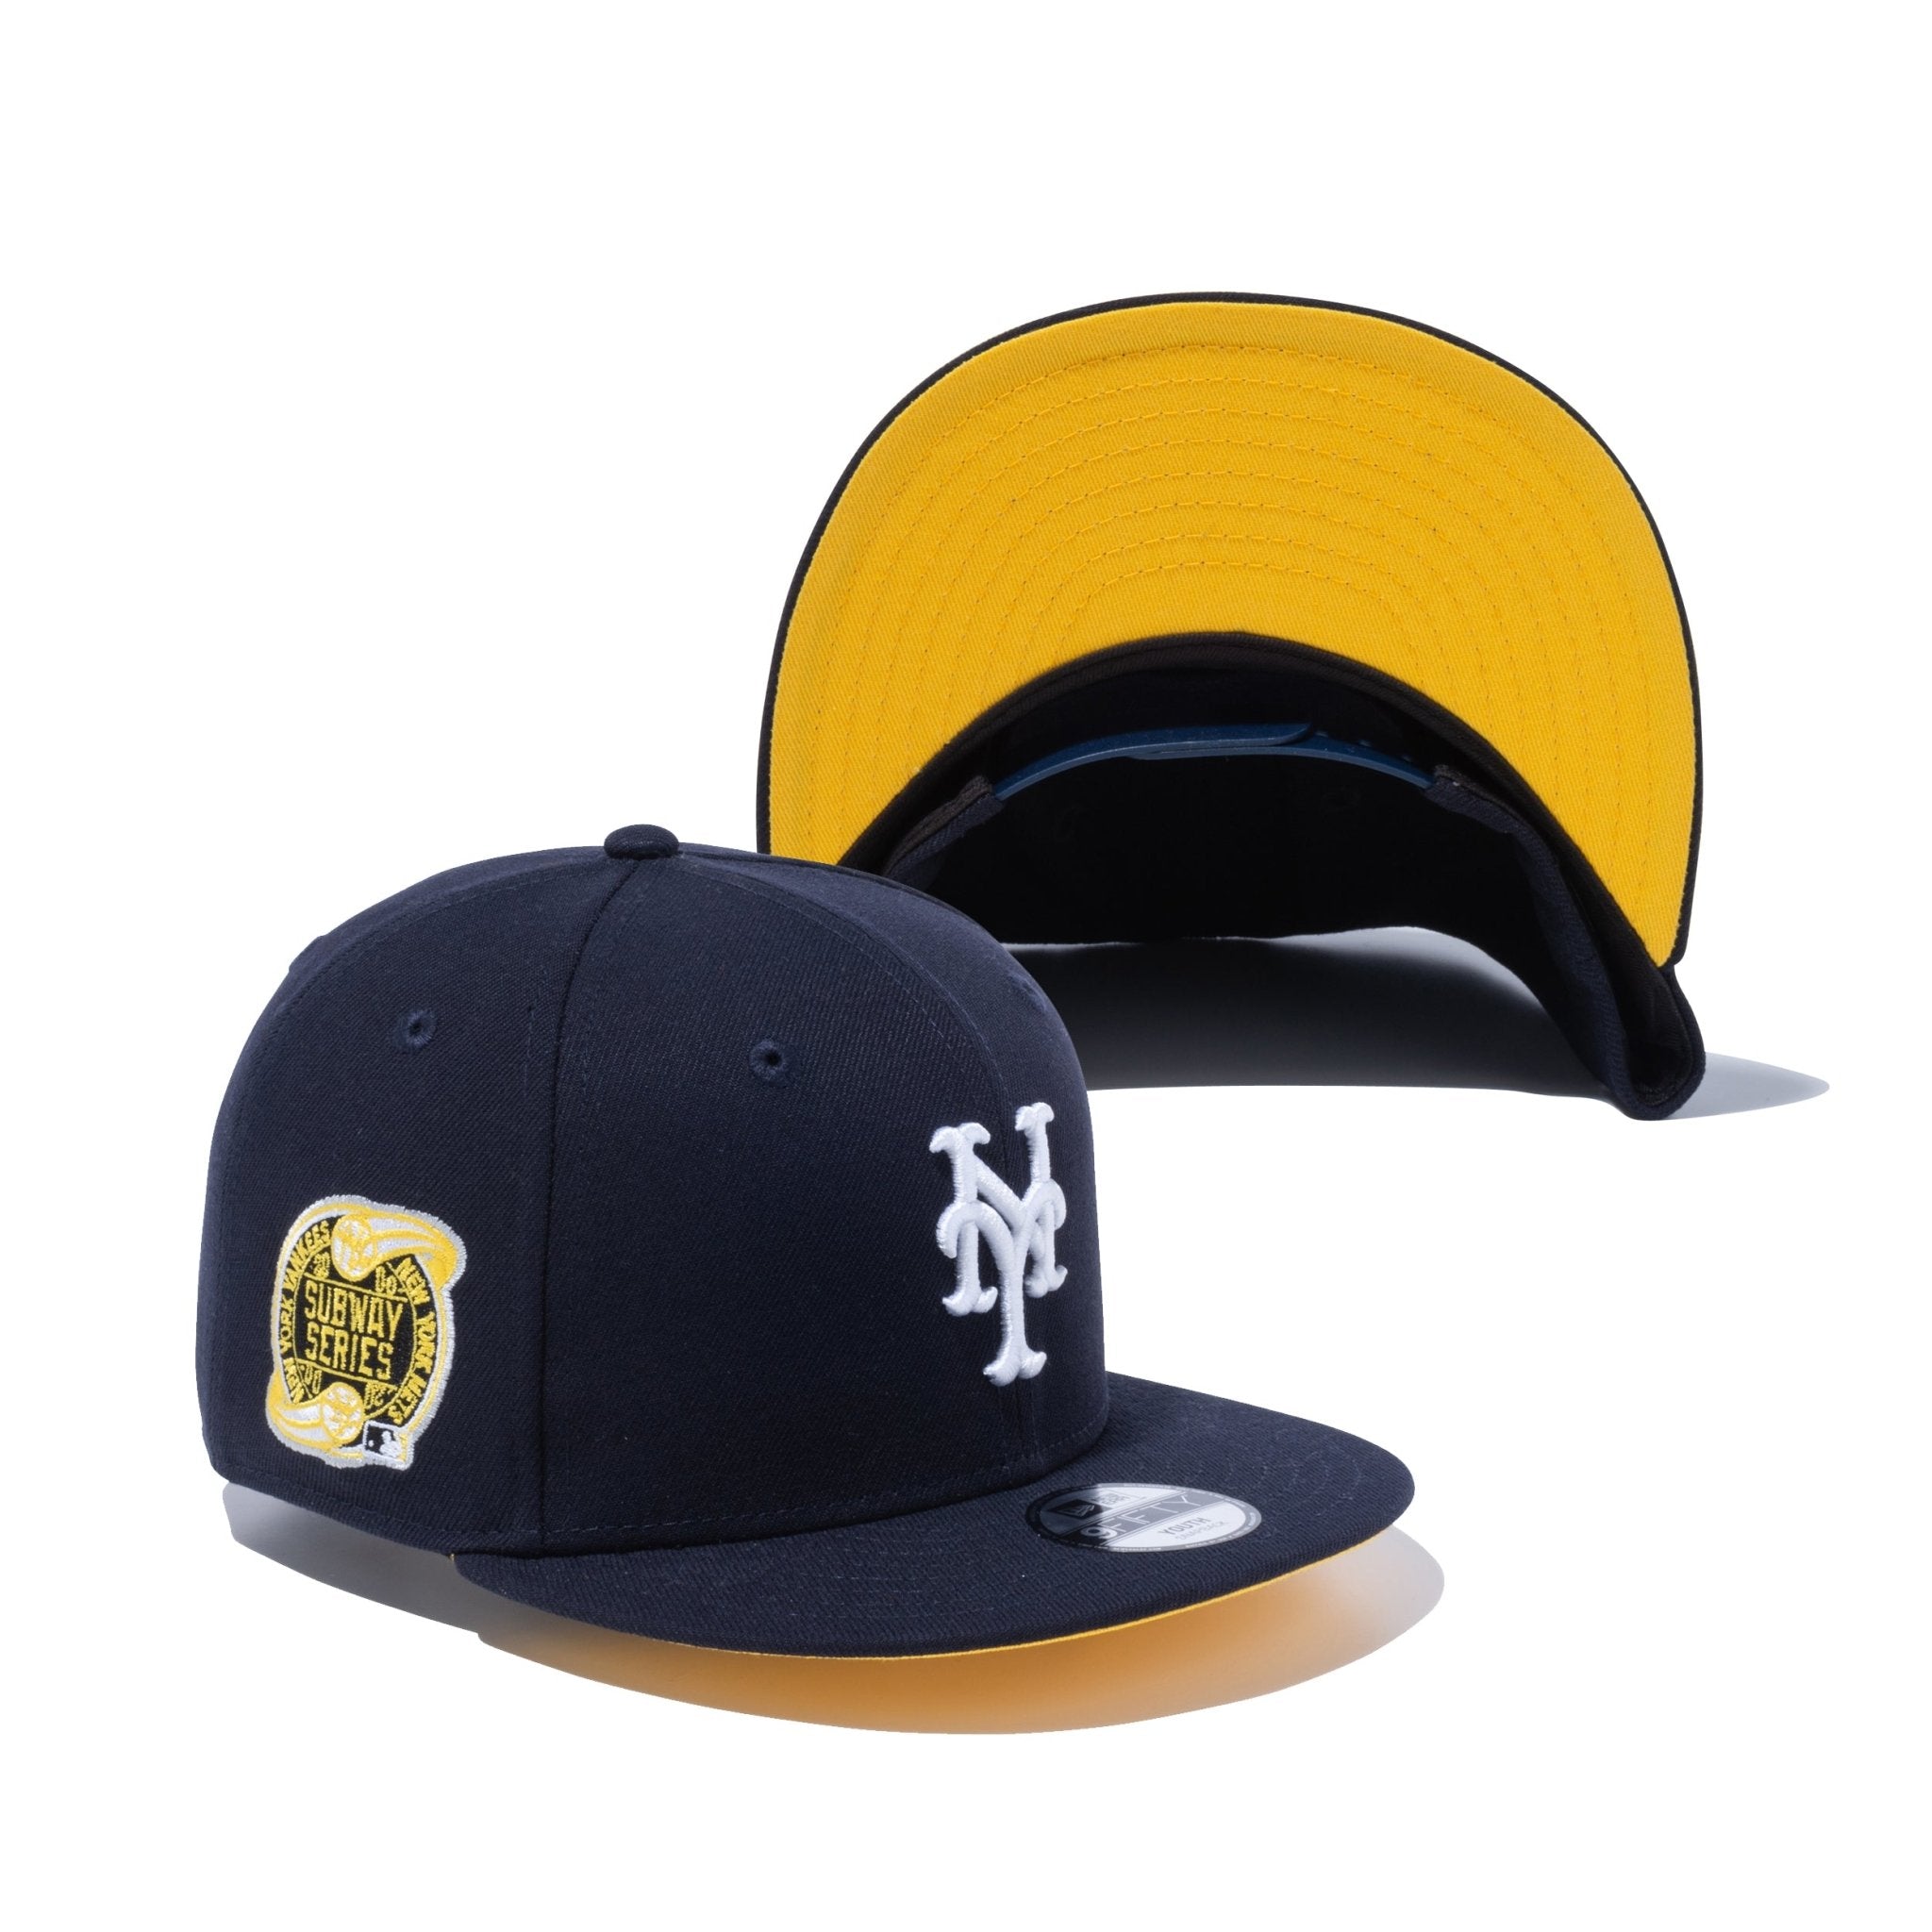 Youth 9FIFTY NYC Yellow Cab イエローキャブ ニューヨーク・メッツ 